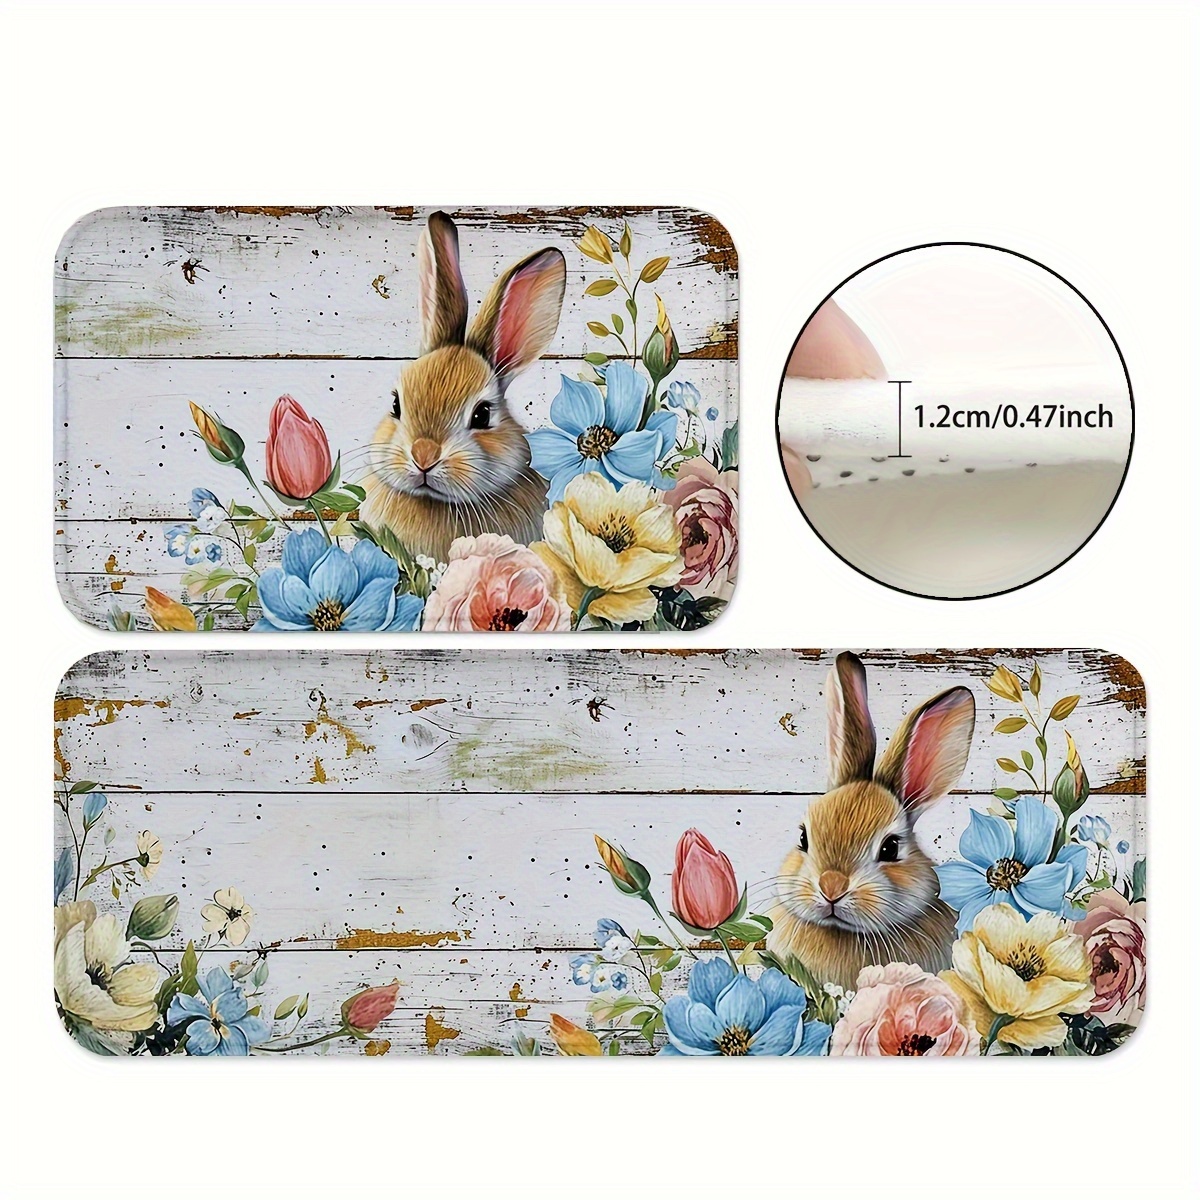 

1/2pcs Exquisite Flower Pattern Kitchen Mats, Easter Rabbit Print Throw Cushions, Anti-skid Foyer Pads, Rugs For Home Office Sink Farmhouse Spring Gift Shower Supplies Sofa Seat Floating Window